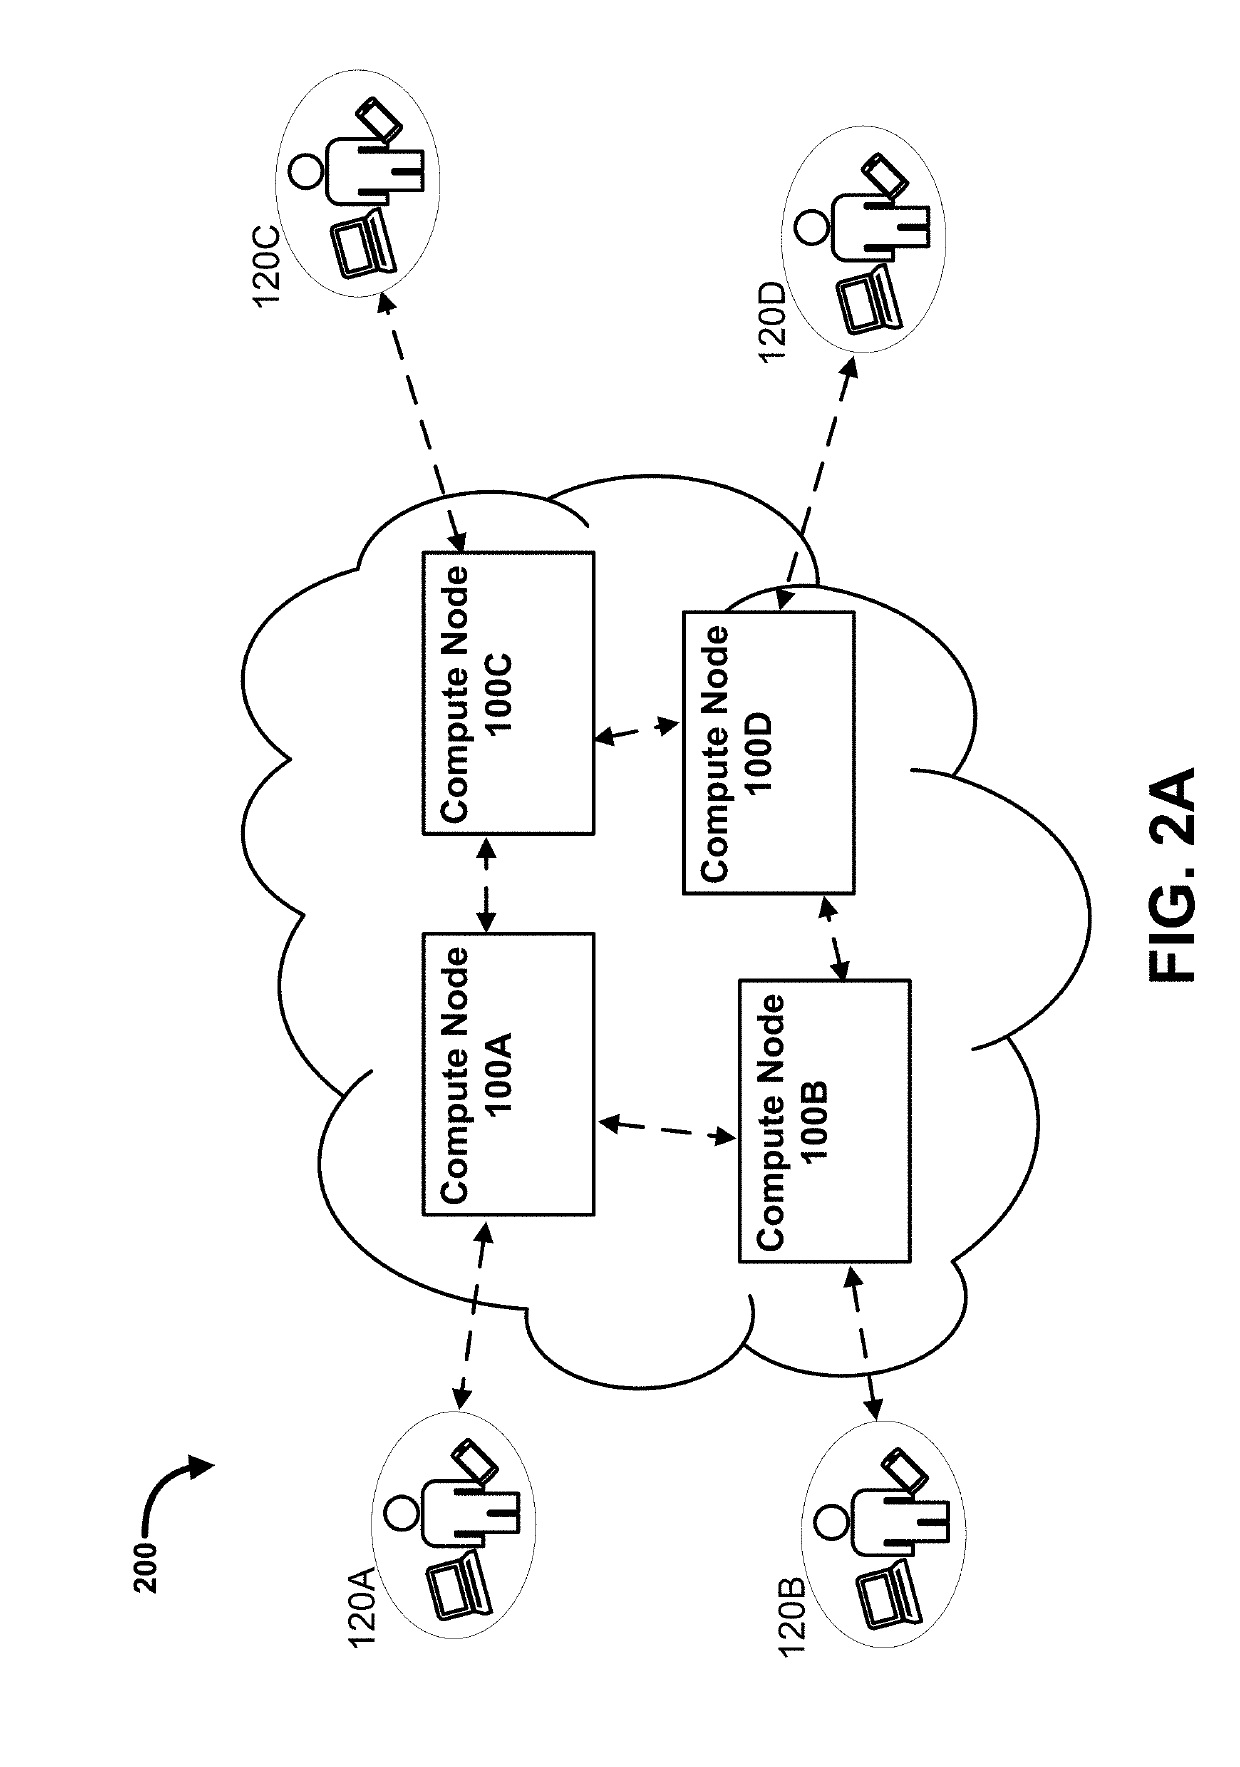 Active adaptation of networked compute devices using vetted reusable software components